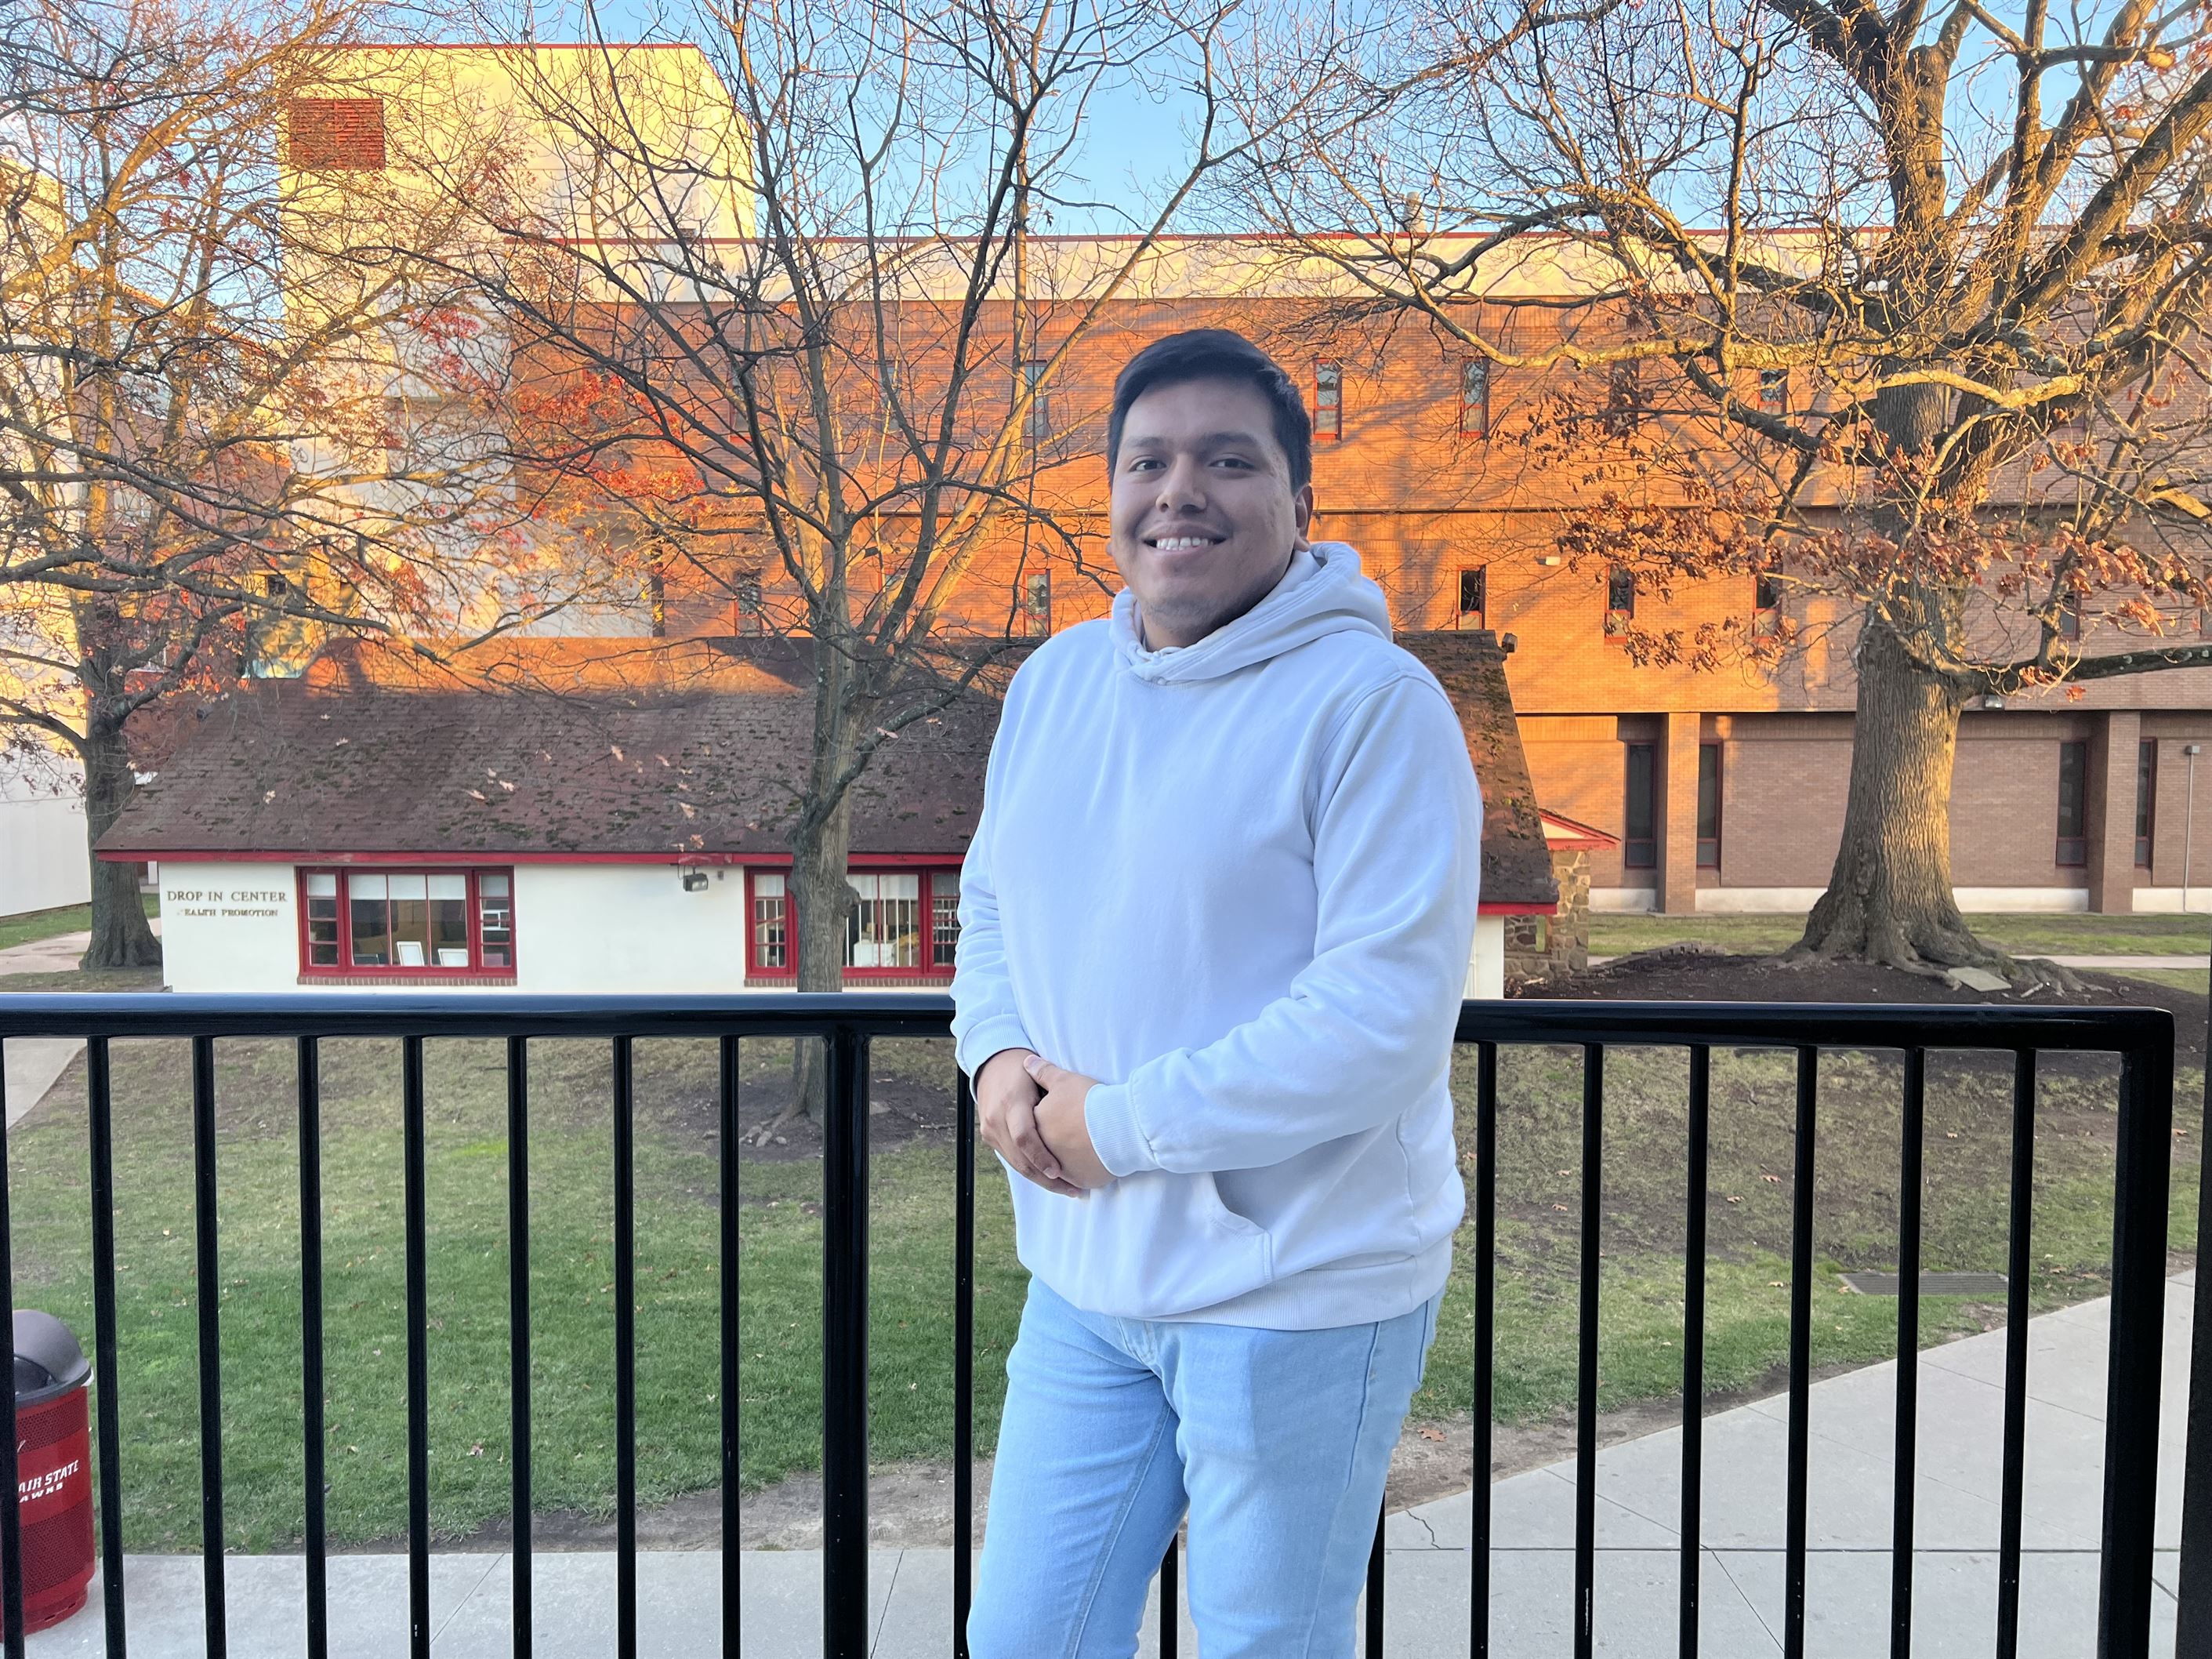 Wilfredo Bruno, still feels comfortable and safe living on campus.